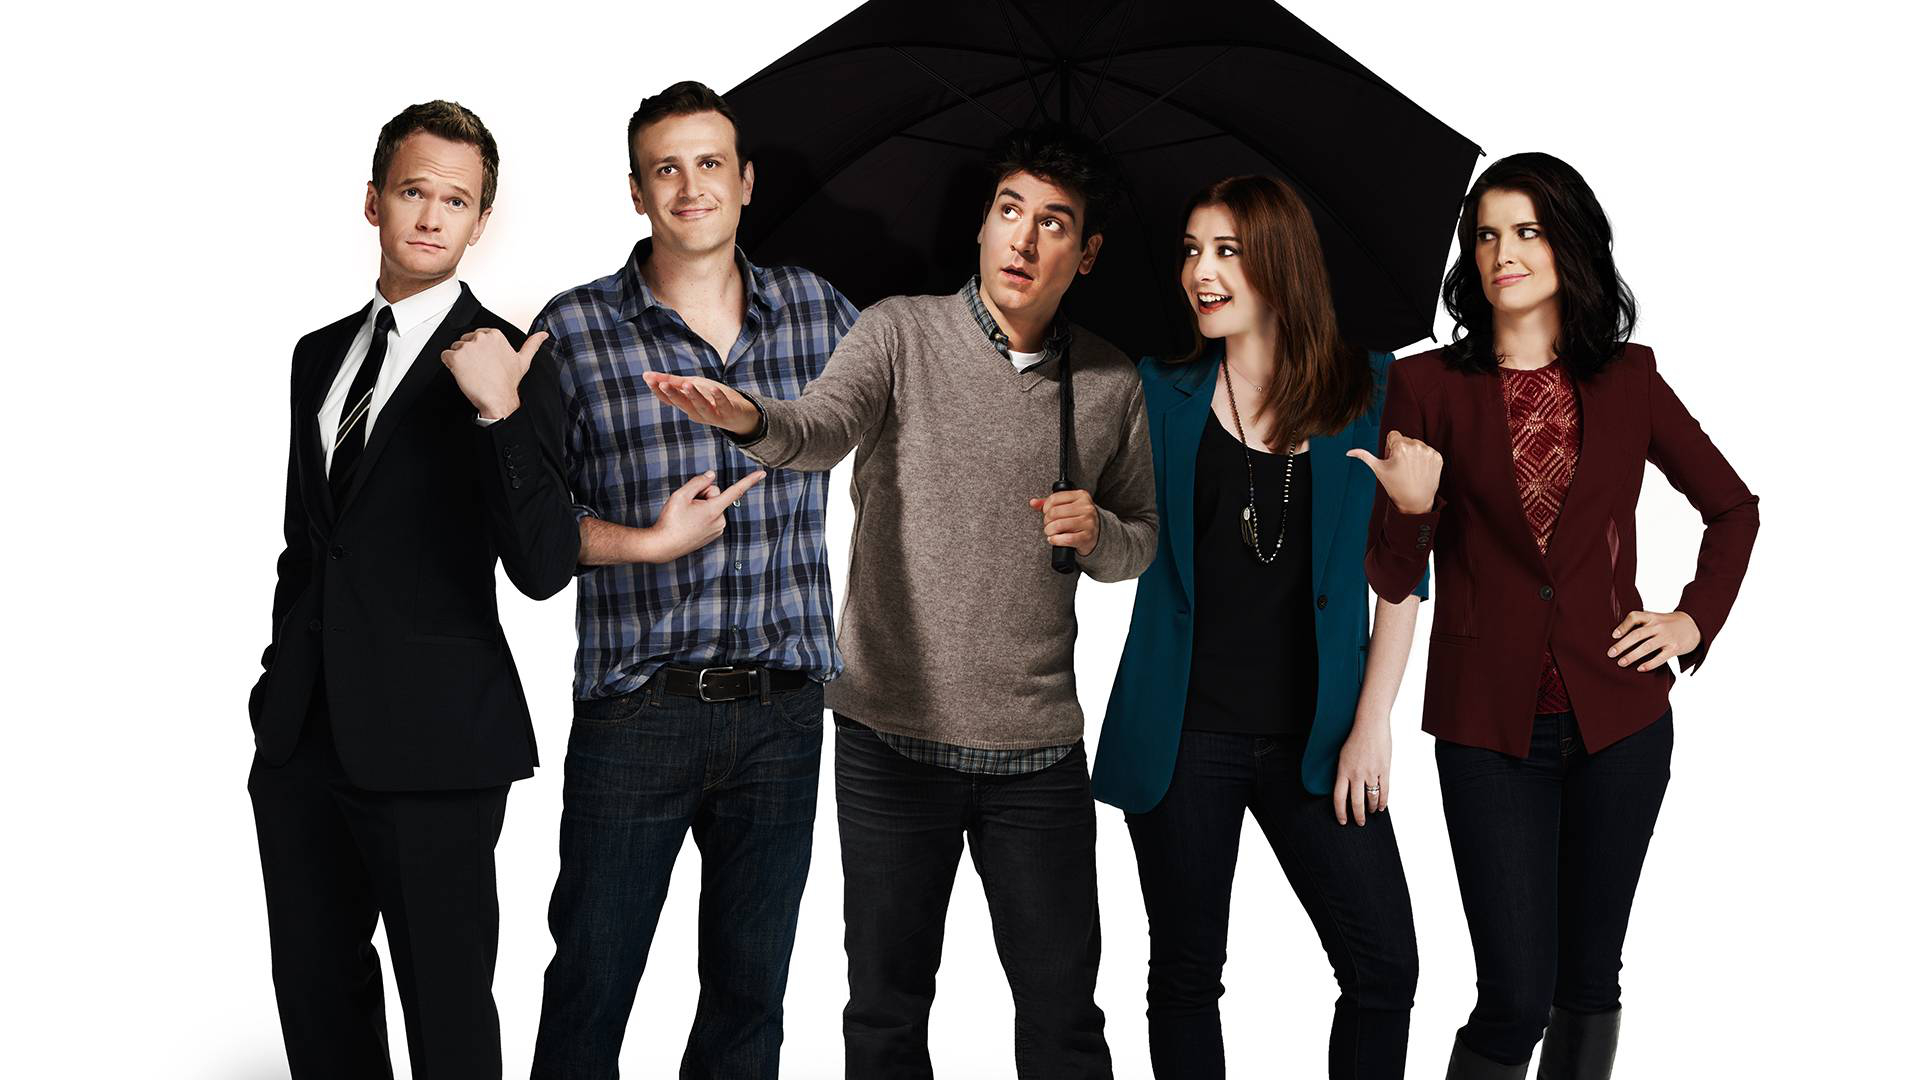 how i met your mother wallpaper,social group,people,youth,team,fun